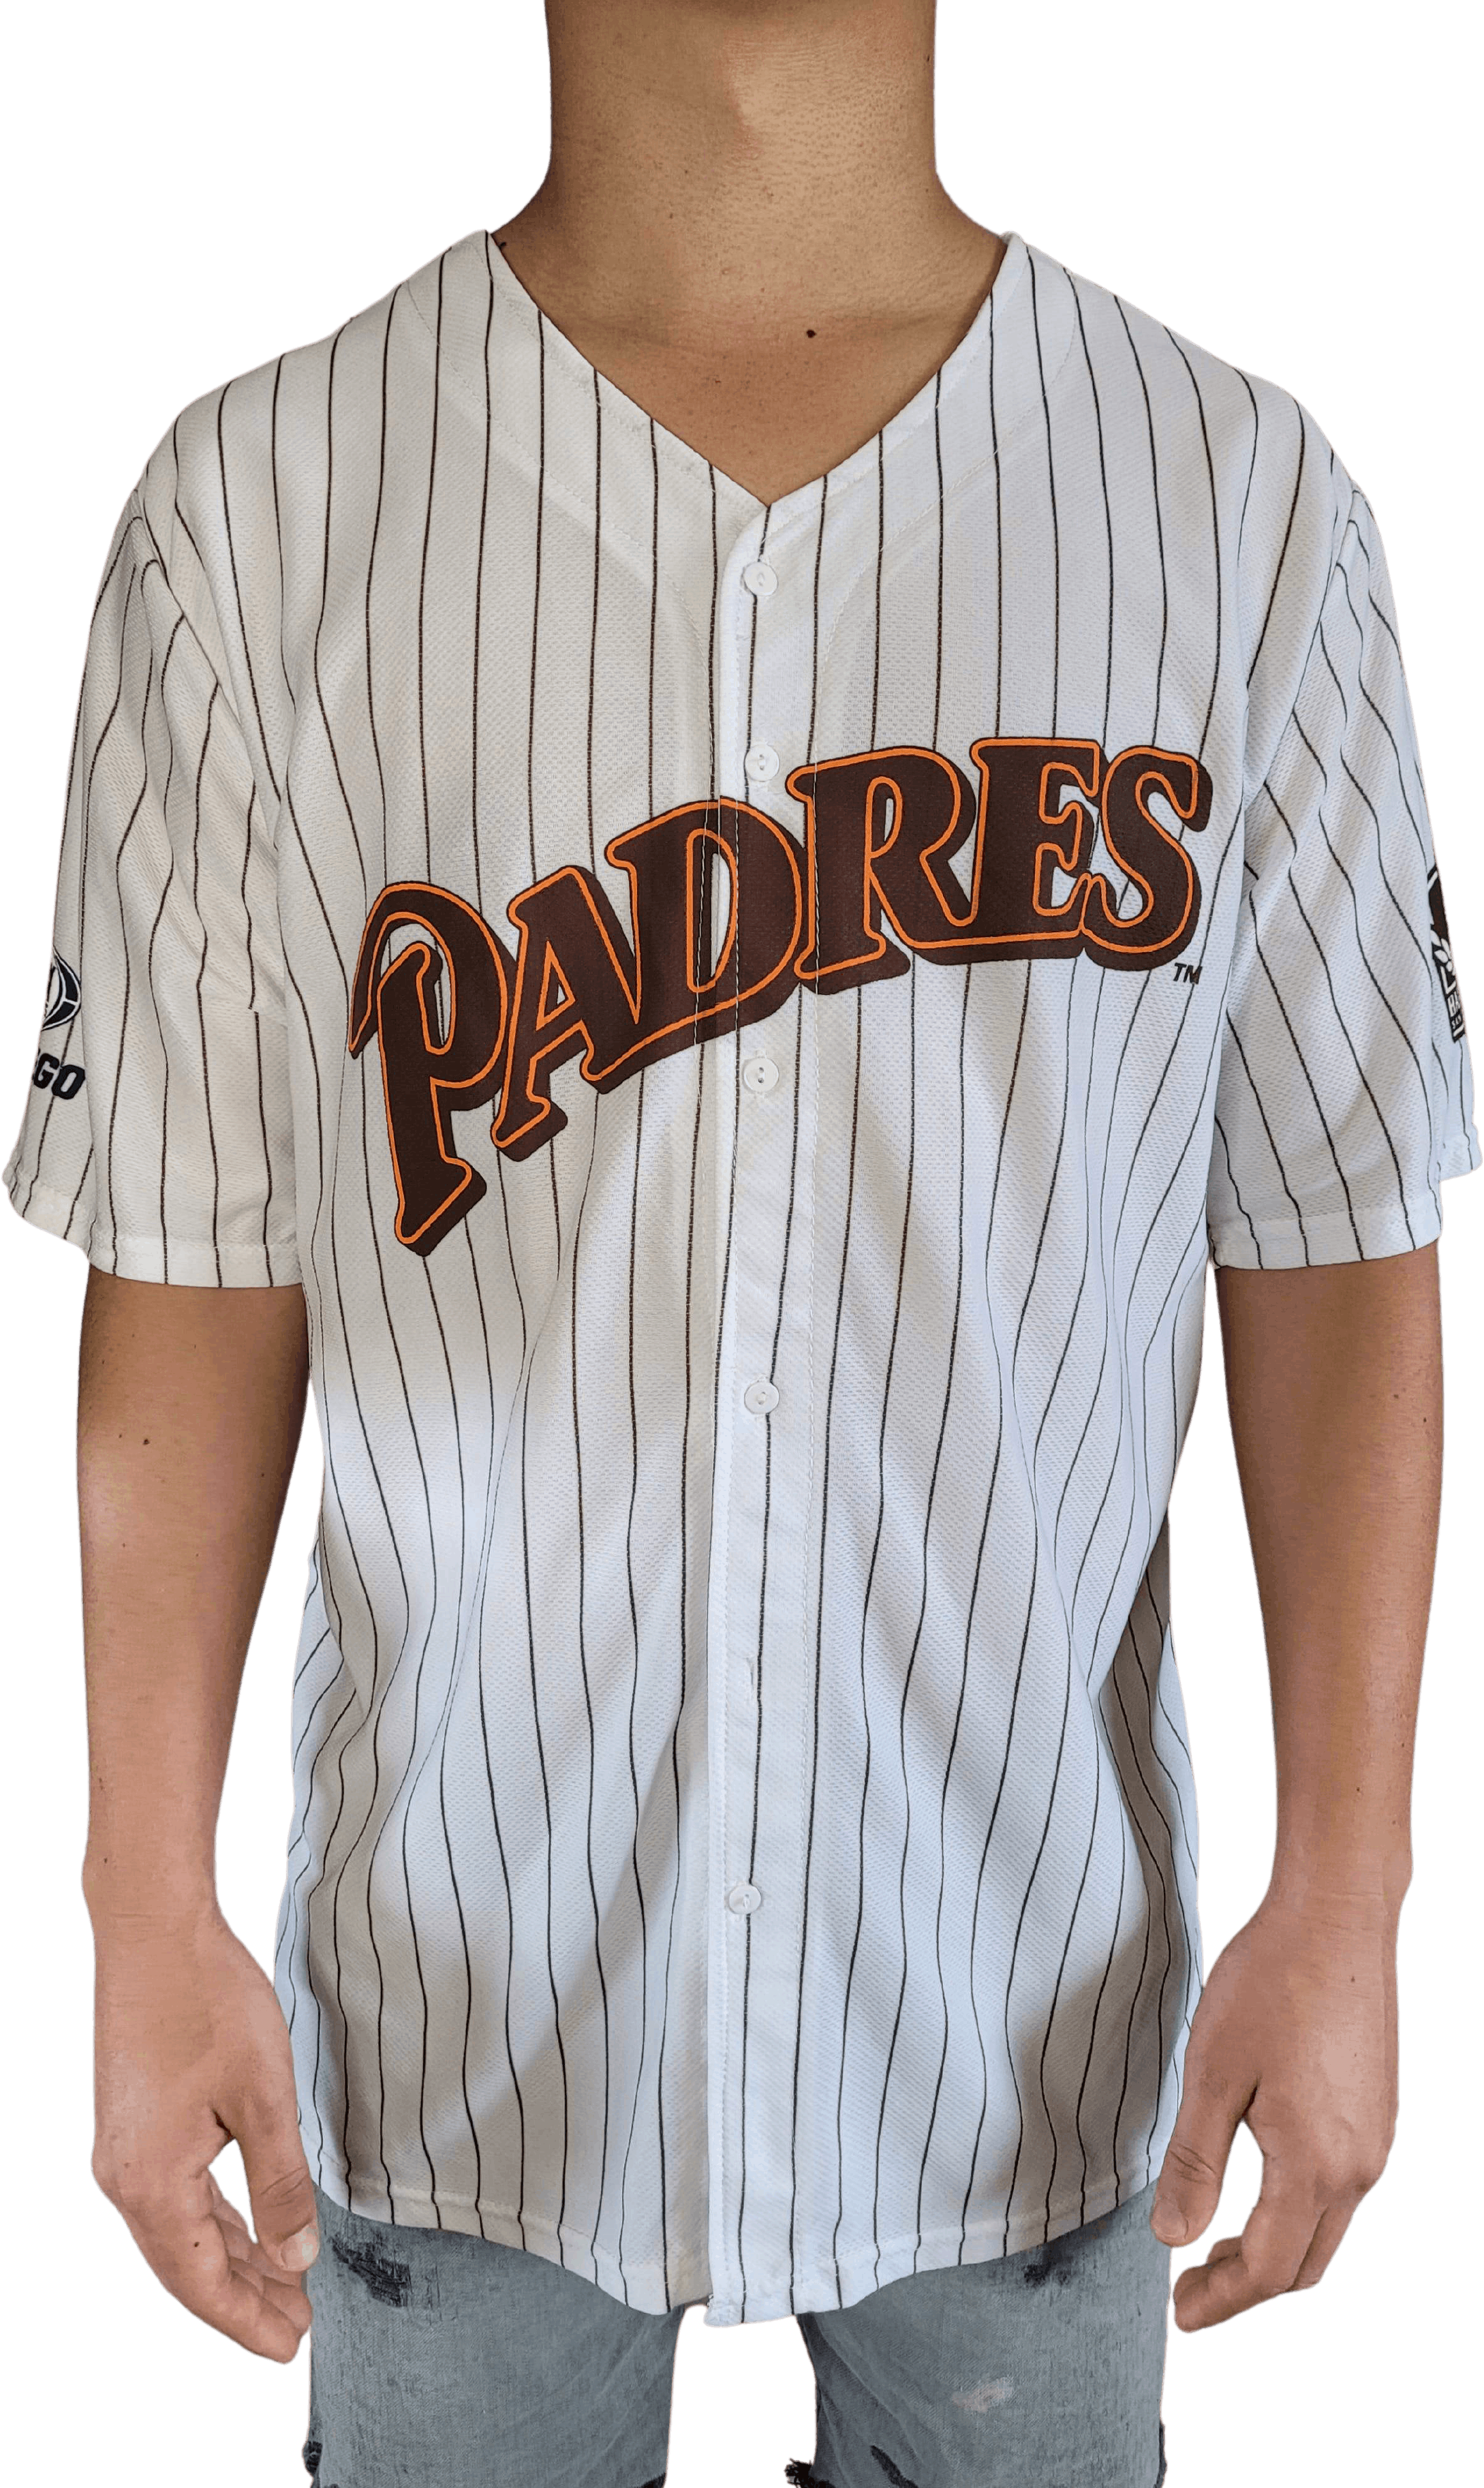 Vintage MLB White Padres Baseball Jersey for Garry Templeton #1 by Padres